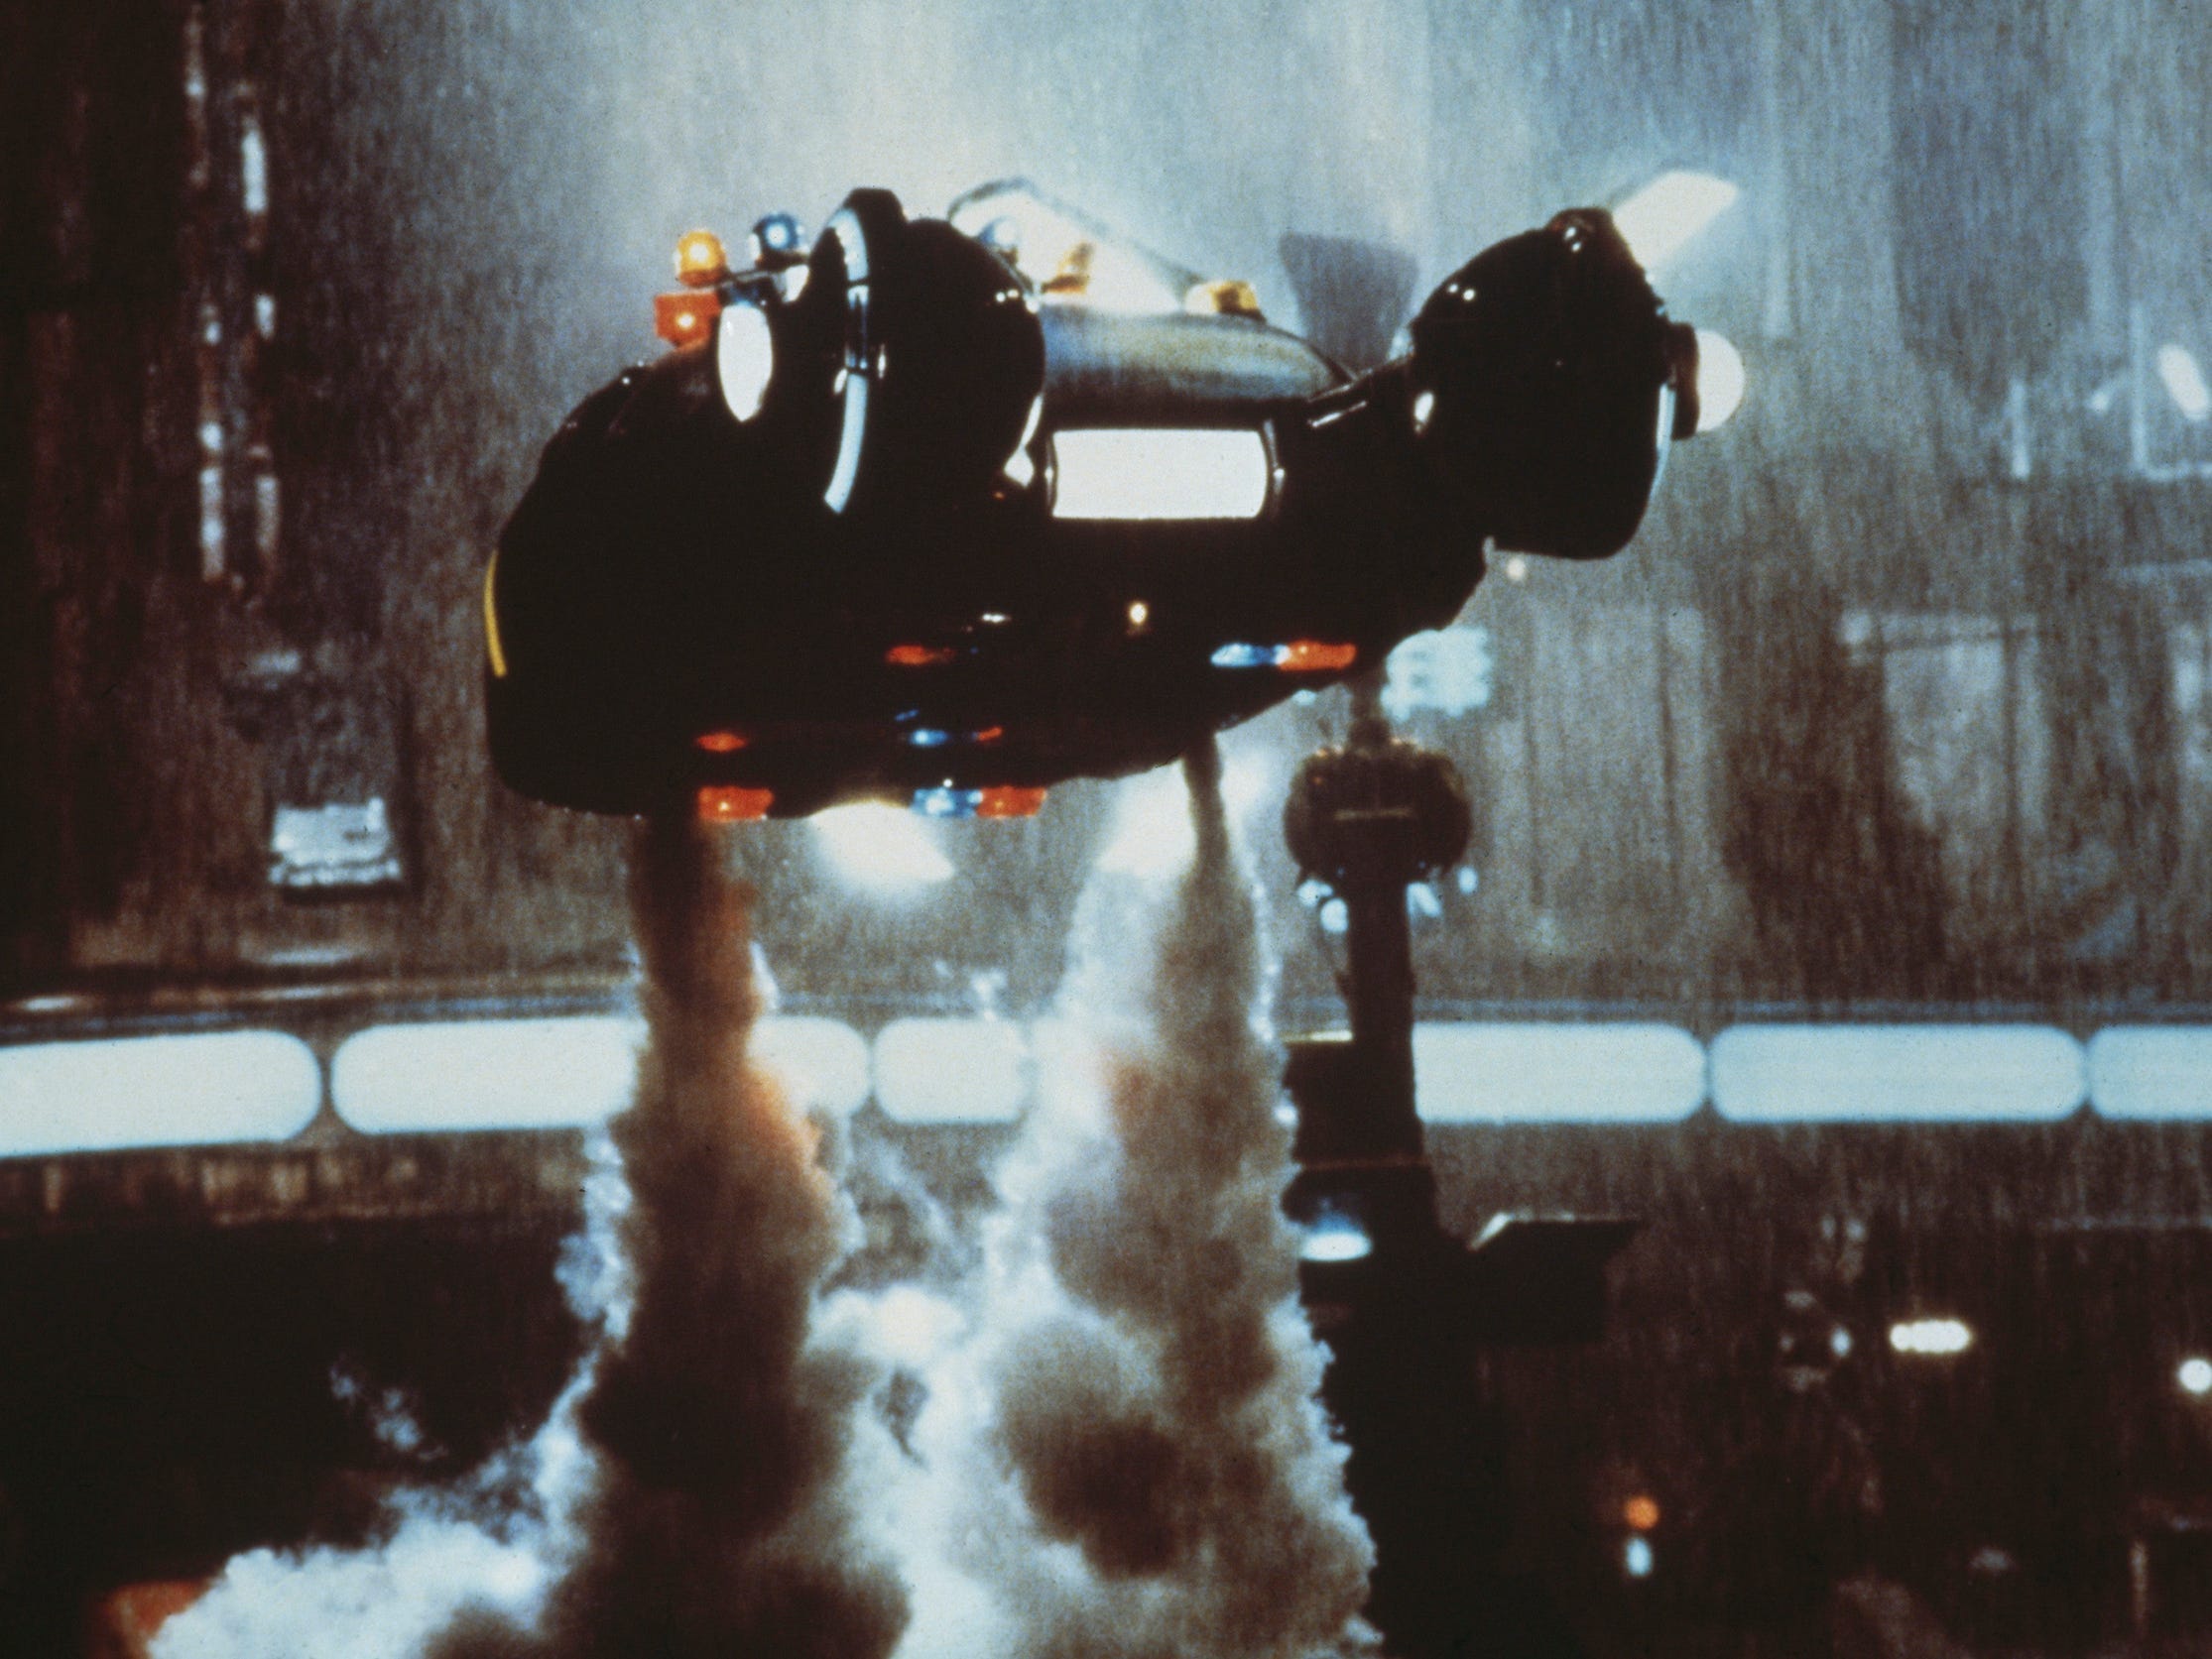 A 'Spinner' flying car takes off in a scene from Ridley Scott's futuristic thriller 'Blade Runner'